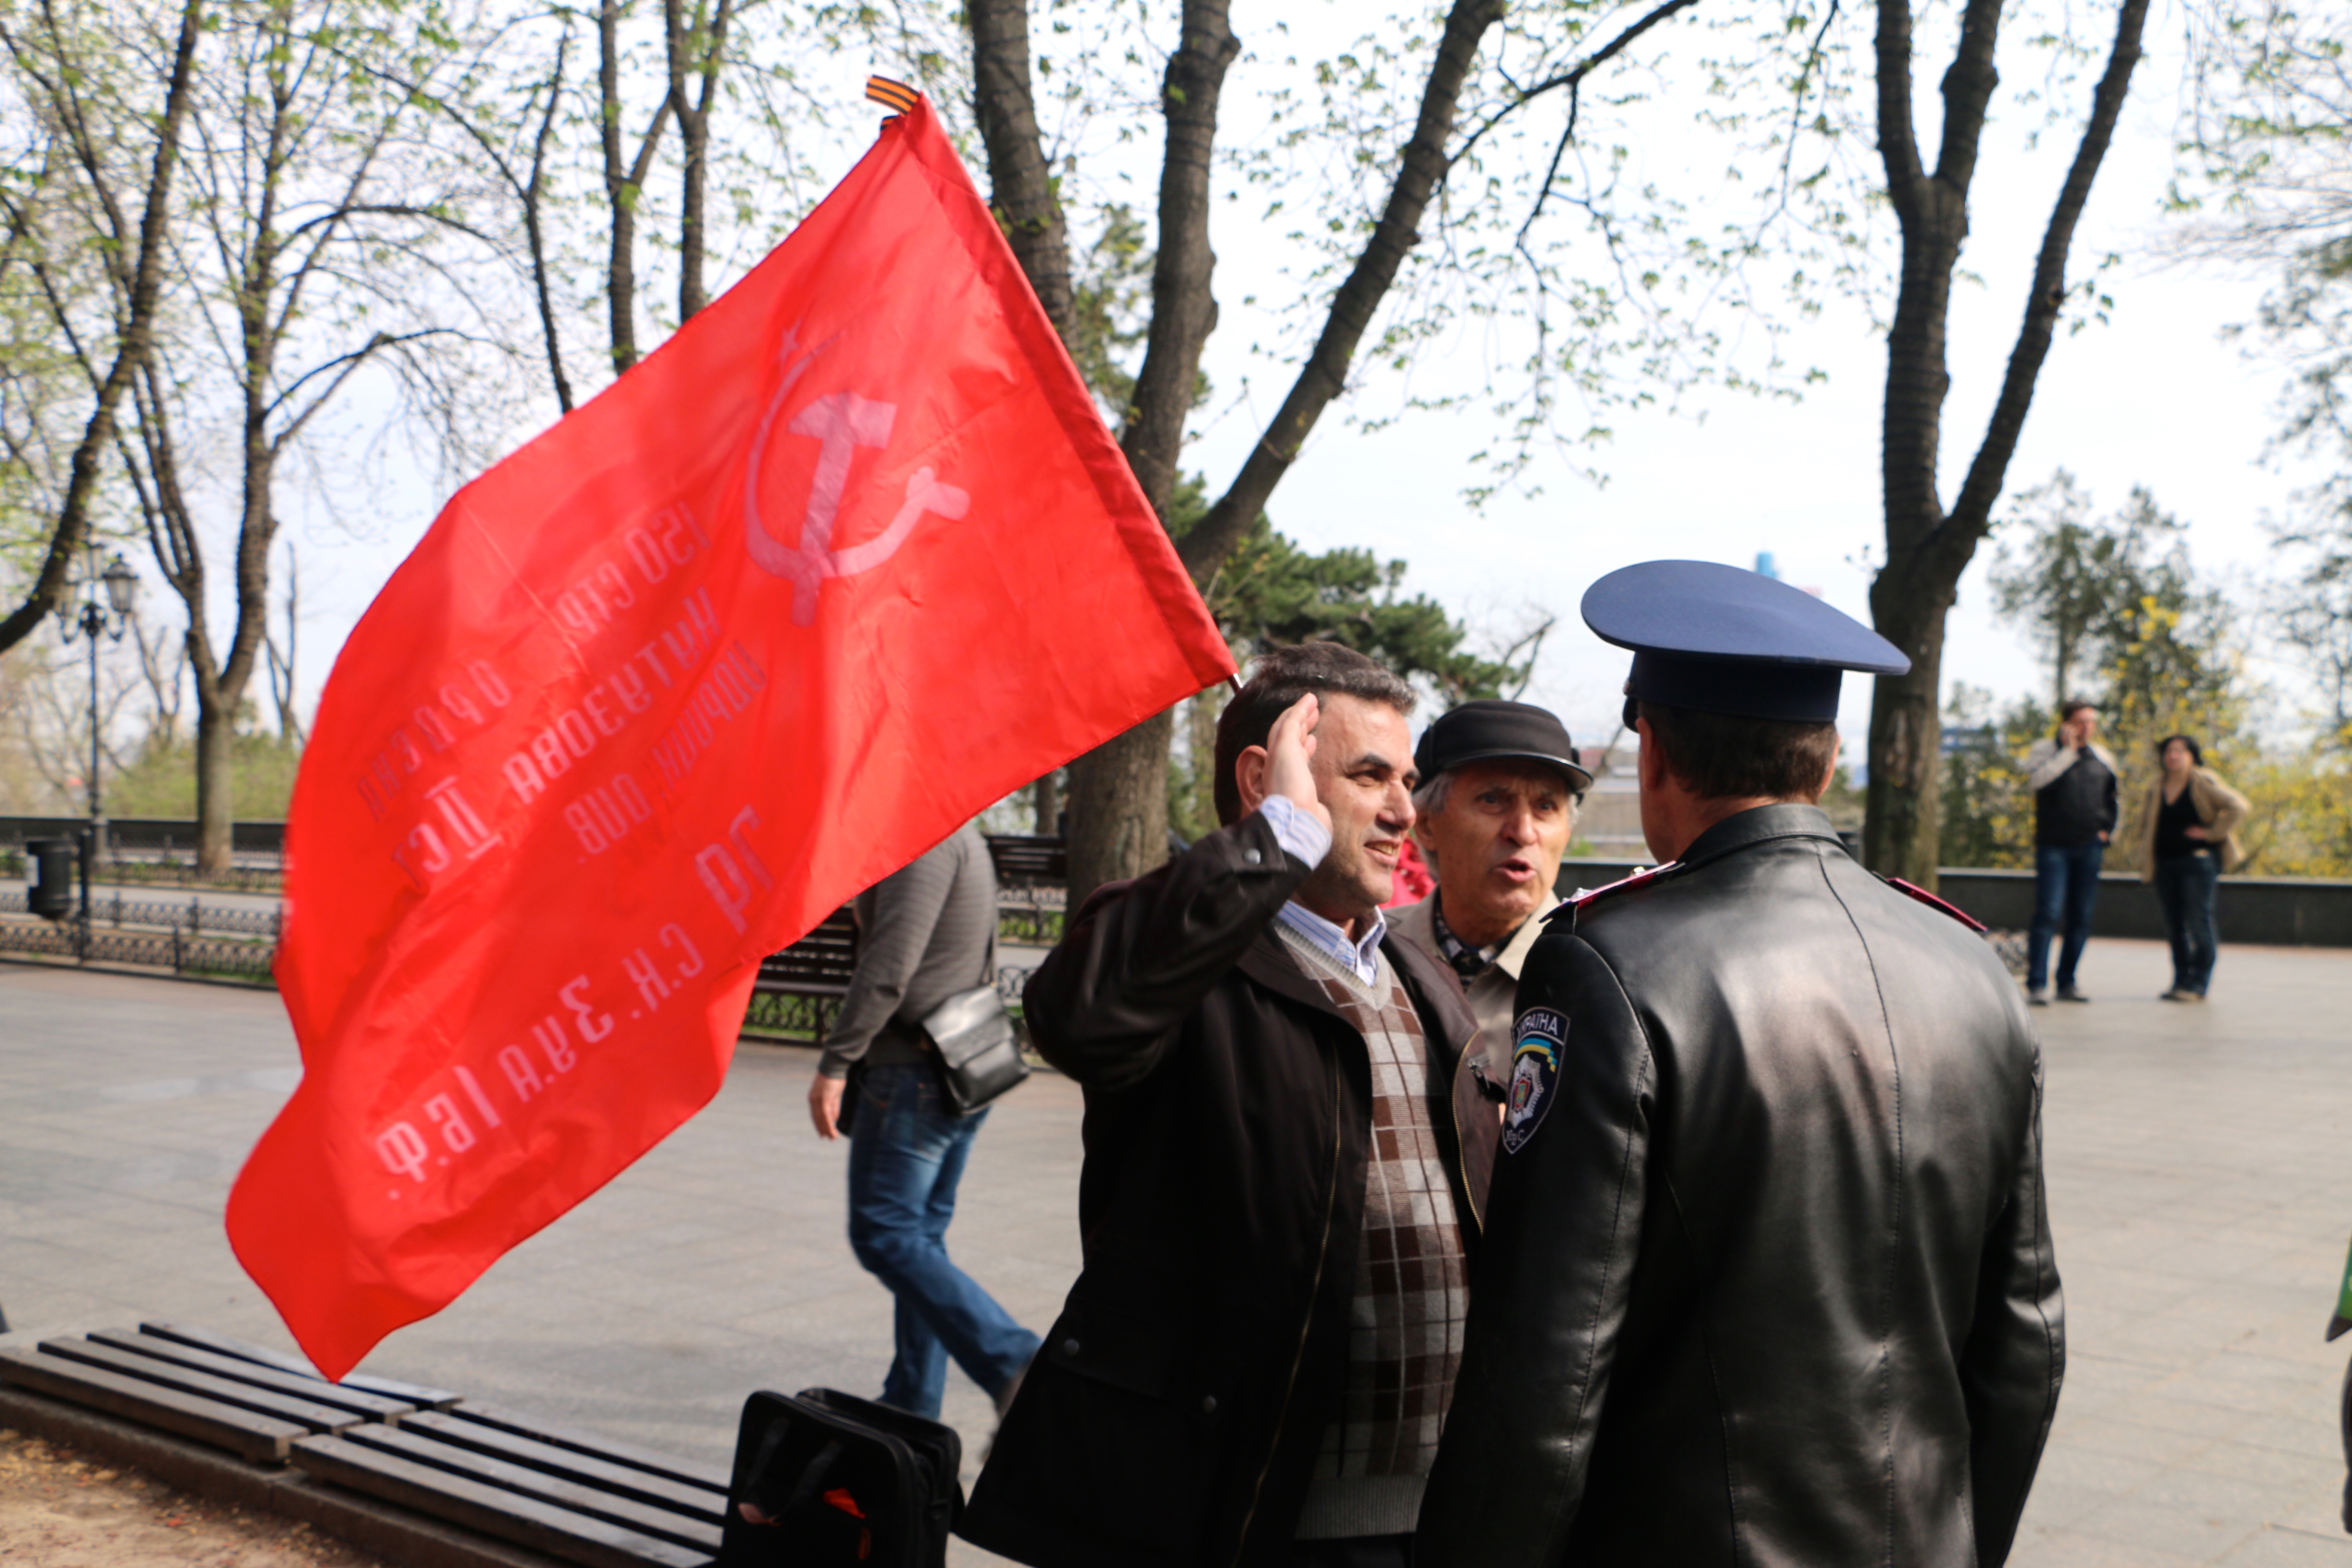 A police officer tells Communist Party members to put away a Soviet flag in Odessa, Ukraine. (Photo: Nolan Peterson/The Daily Signal)